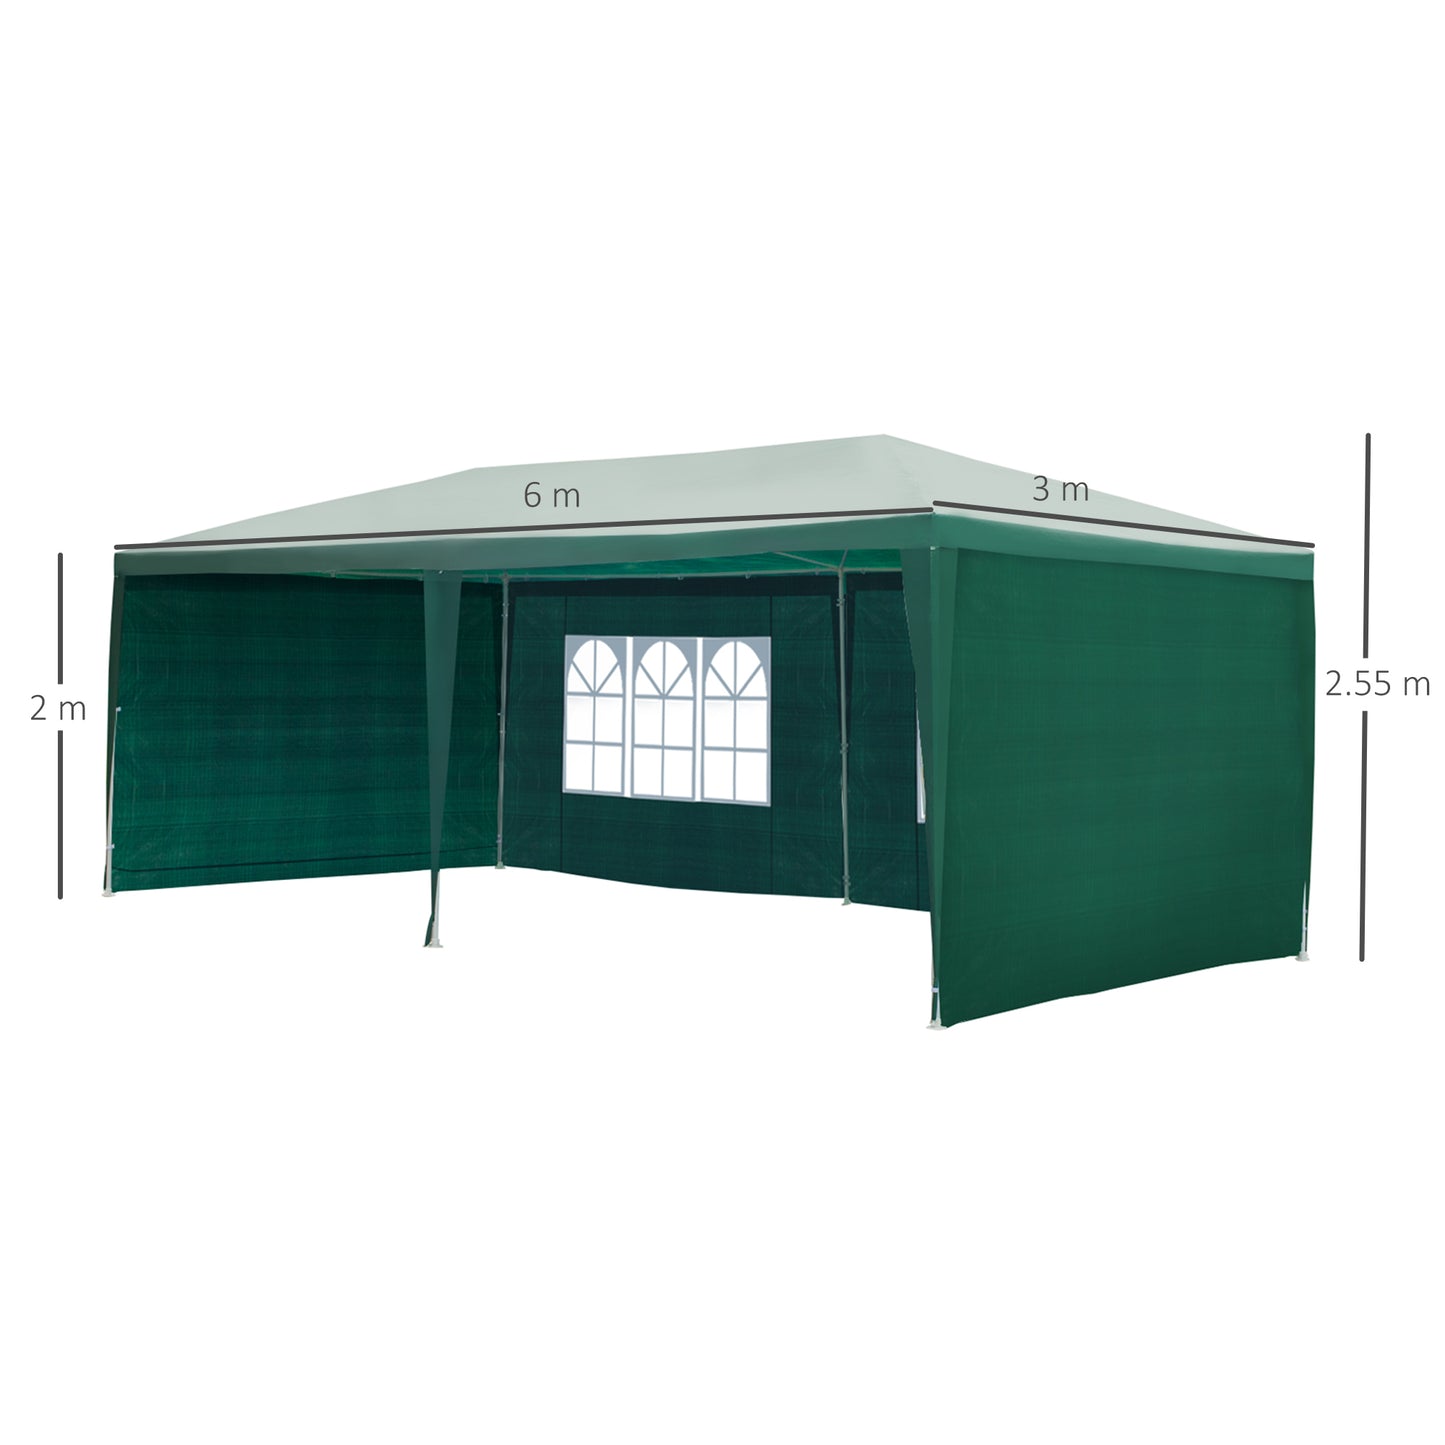 Outsunny Gazebo Canopy Camping/Party/Wedding Tent with PE Cloth 6x3 m-Green